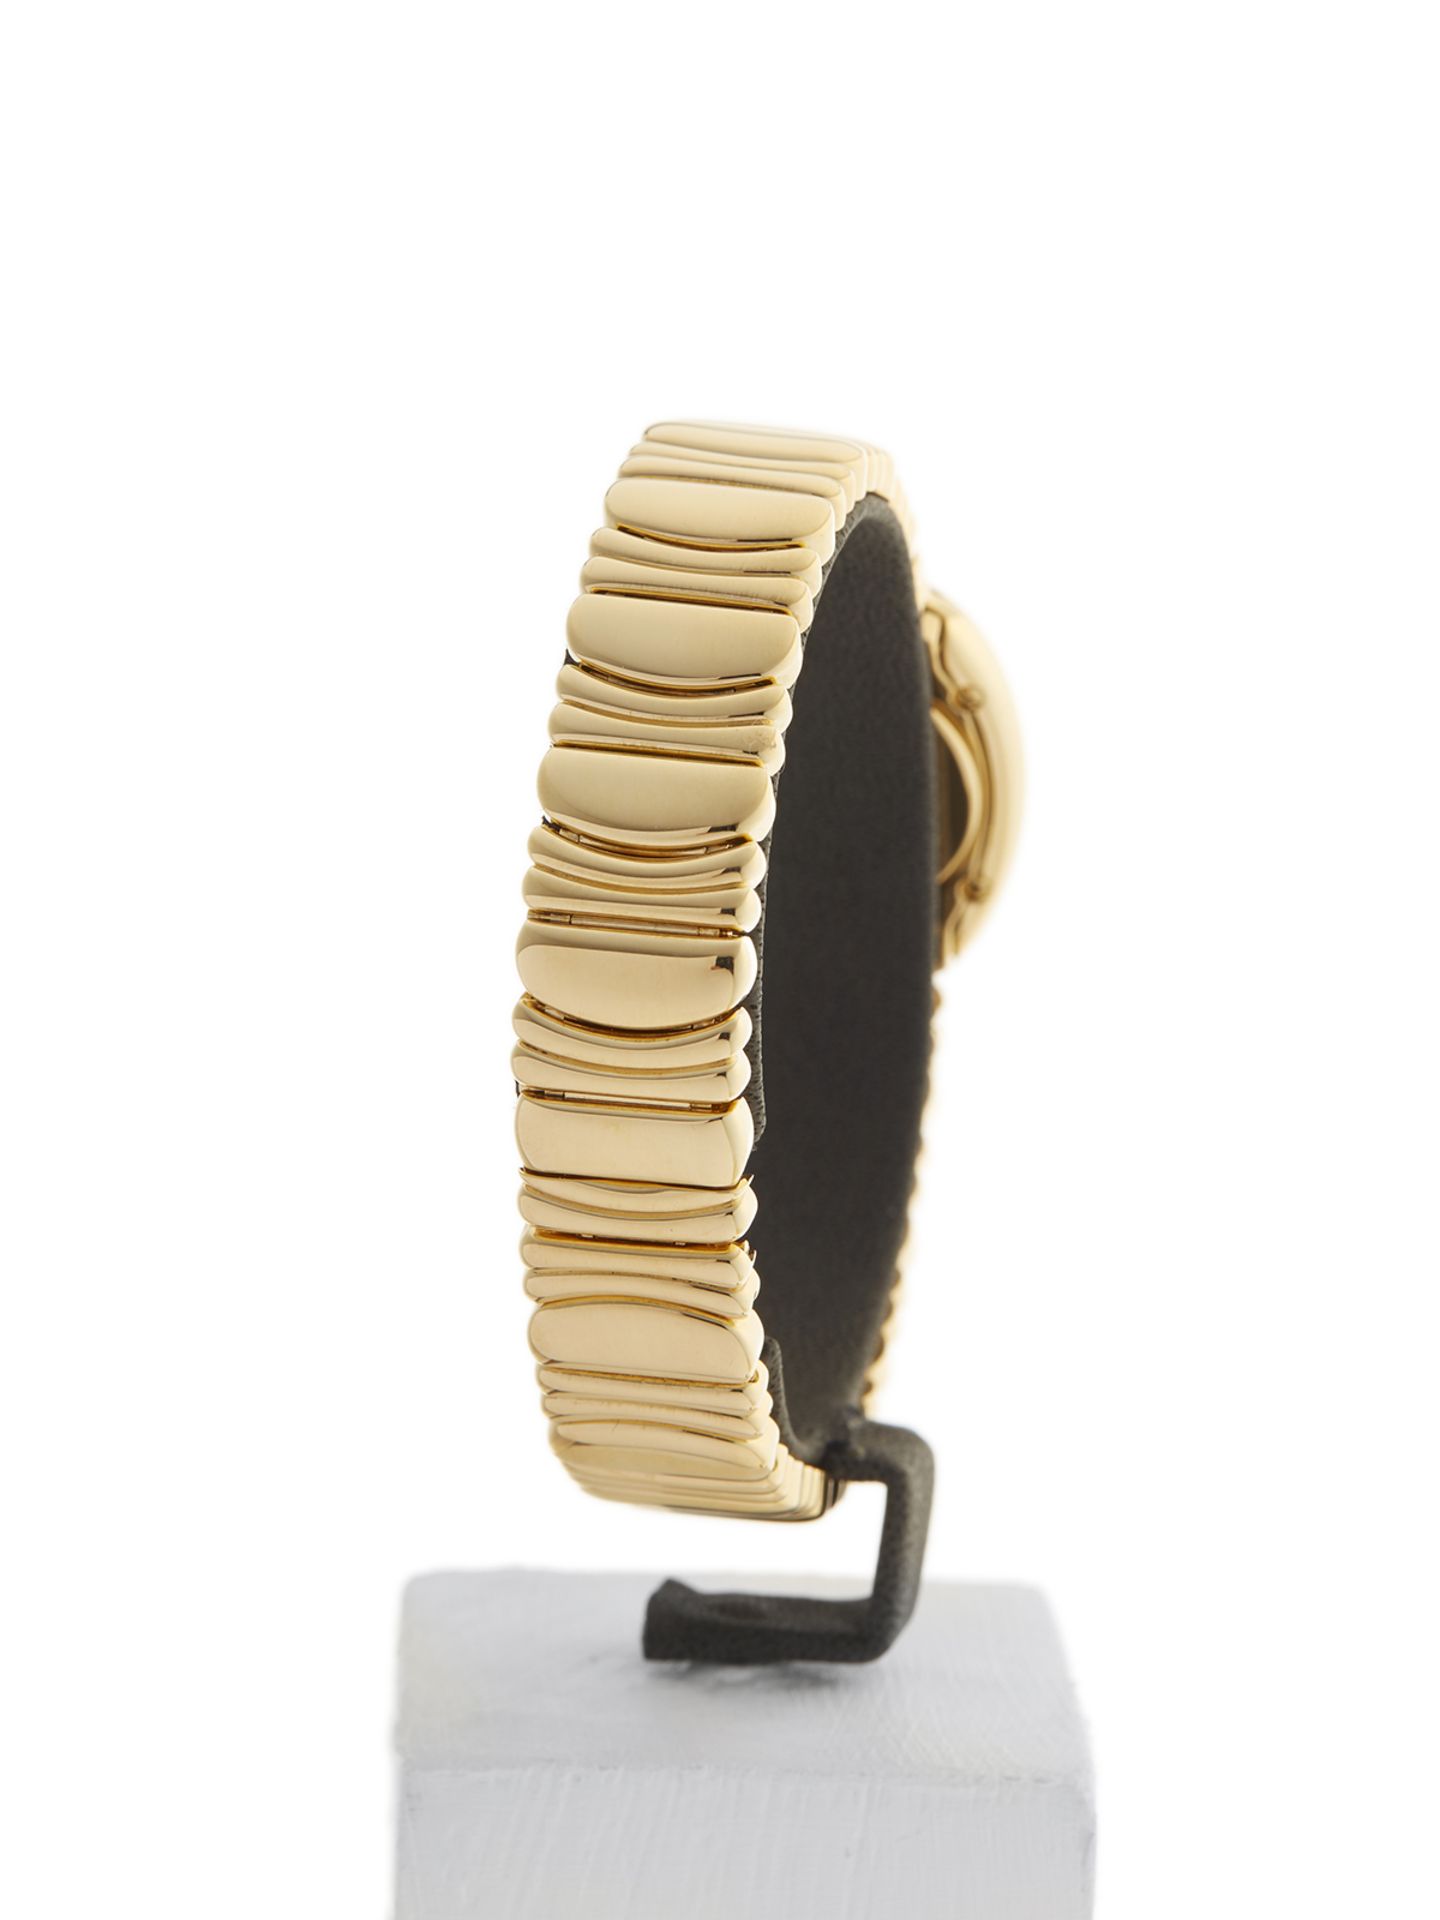 Cartier Baignoire 22mm 18k Yellow Gold 1954 - Image 7 of 8